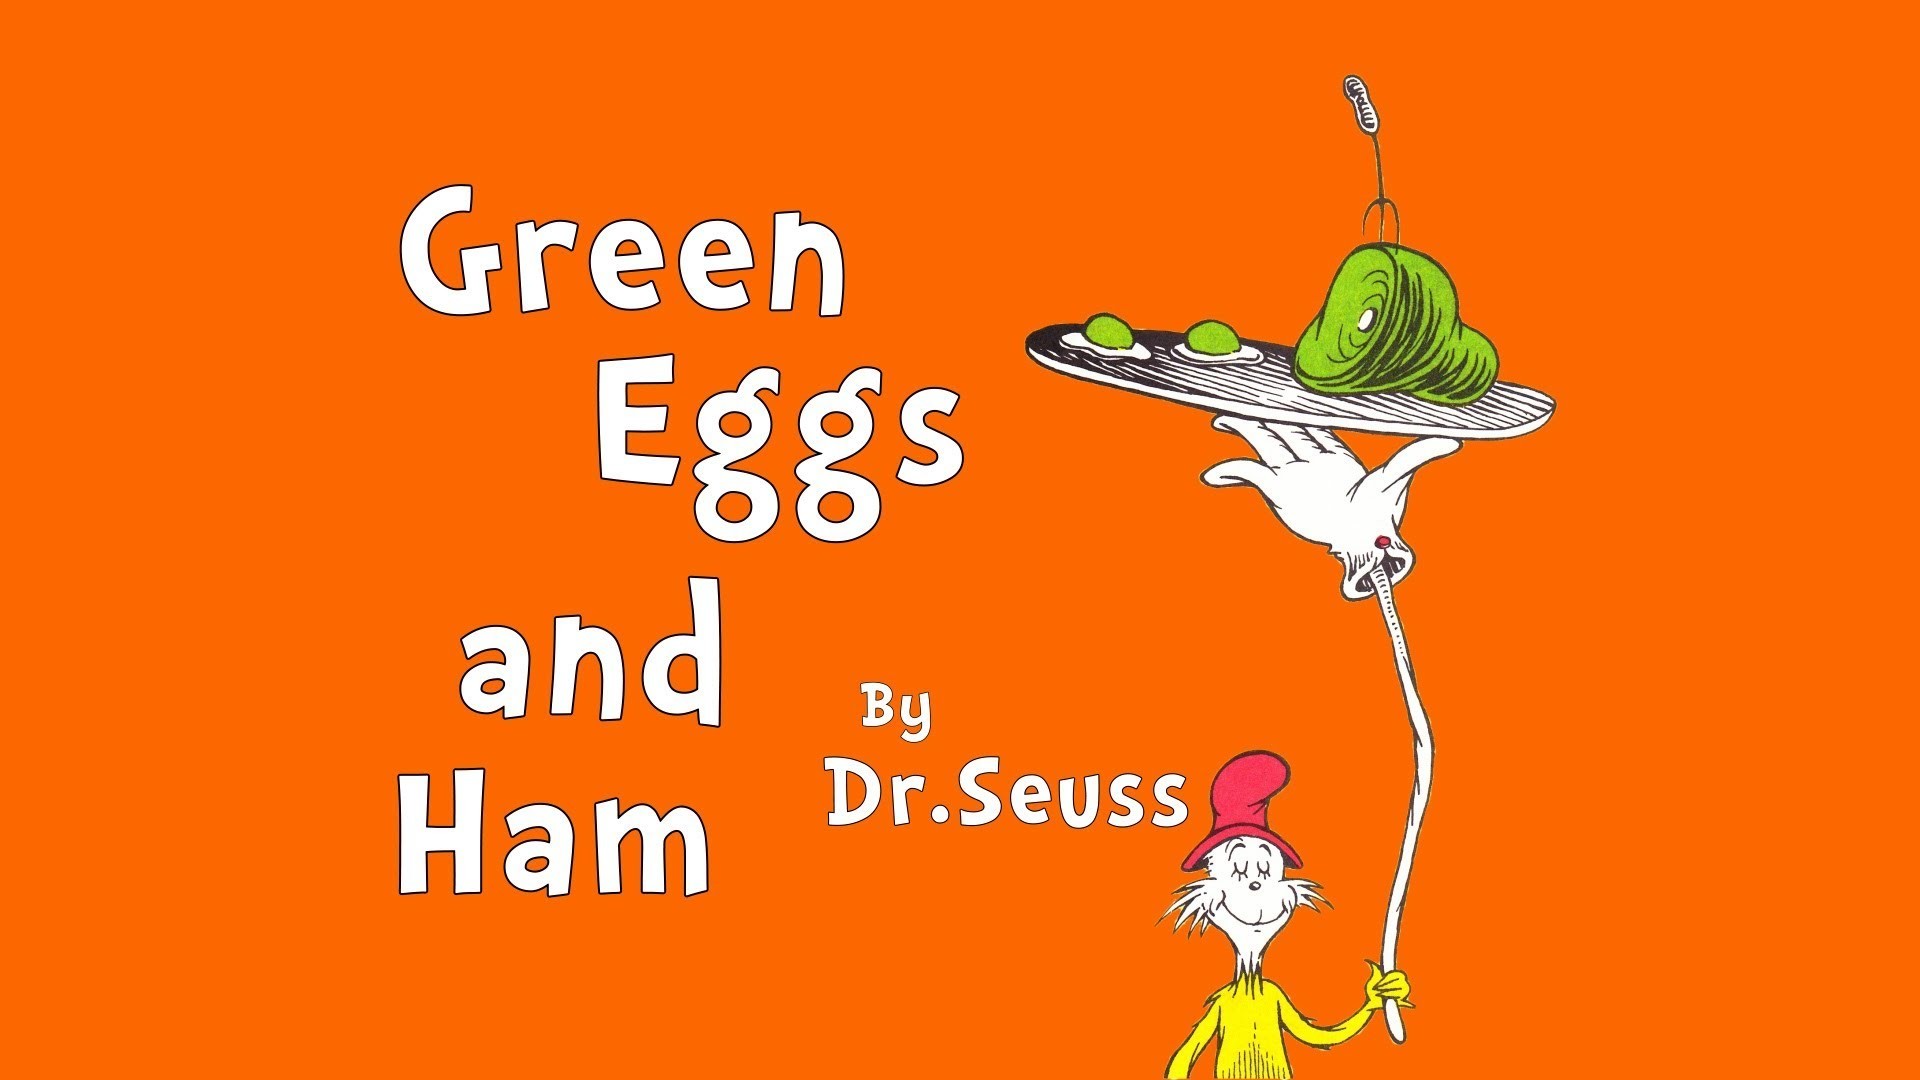 1920x1080 "Green Eggs and Ham" by Dr. Seuss - A Storytime Read-Aloud! - YouTube